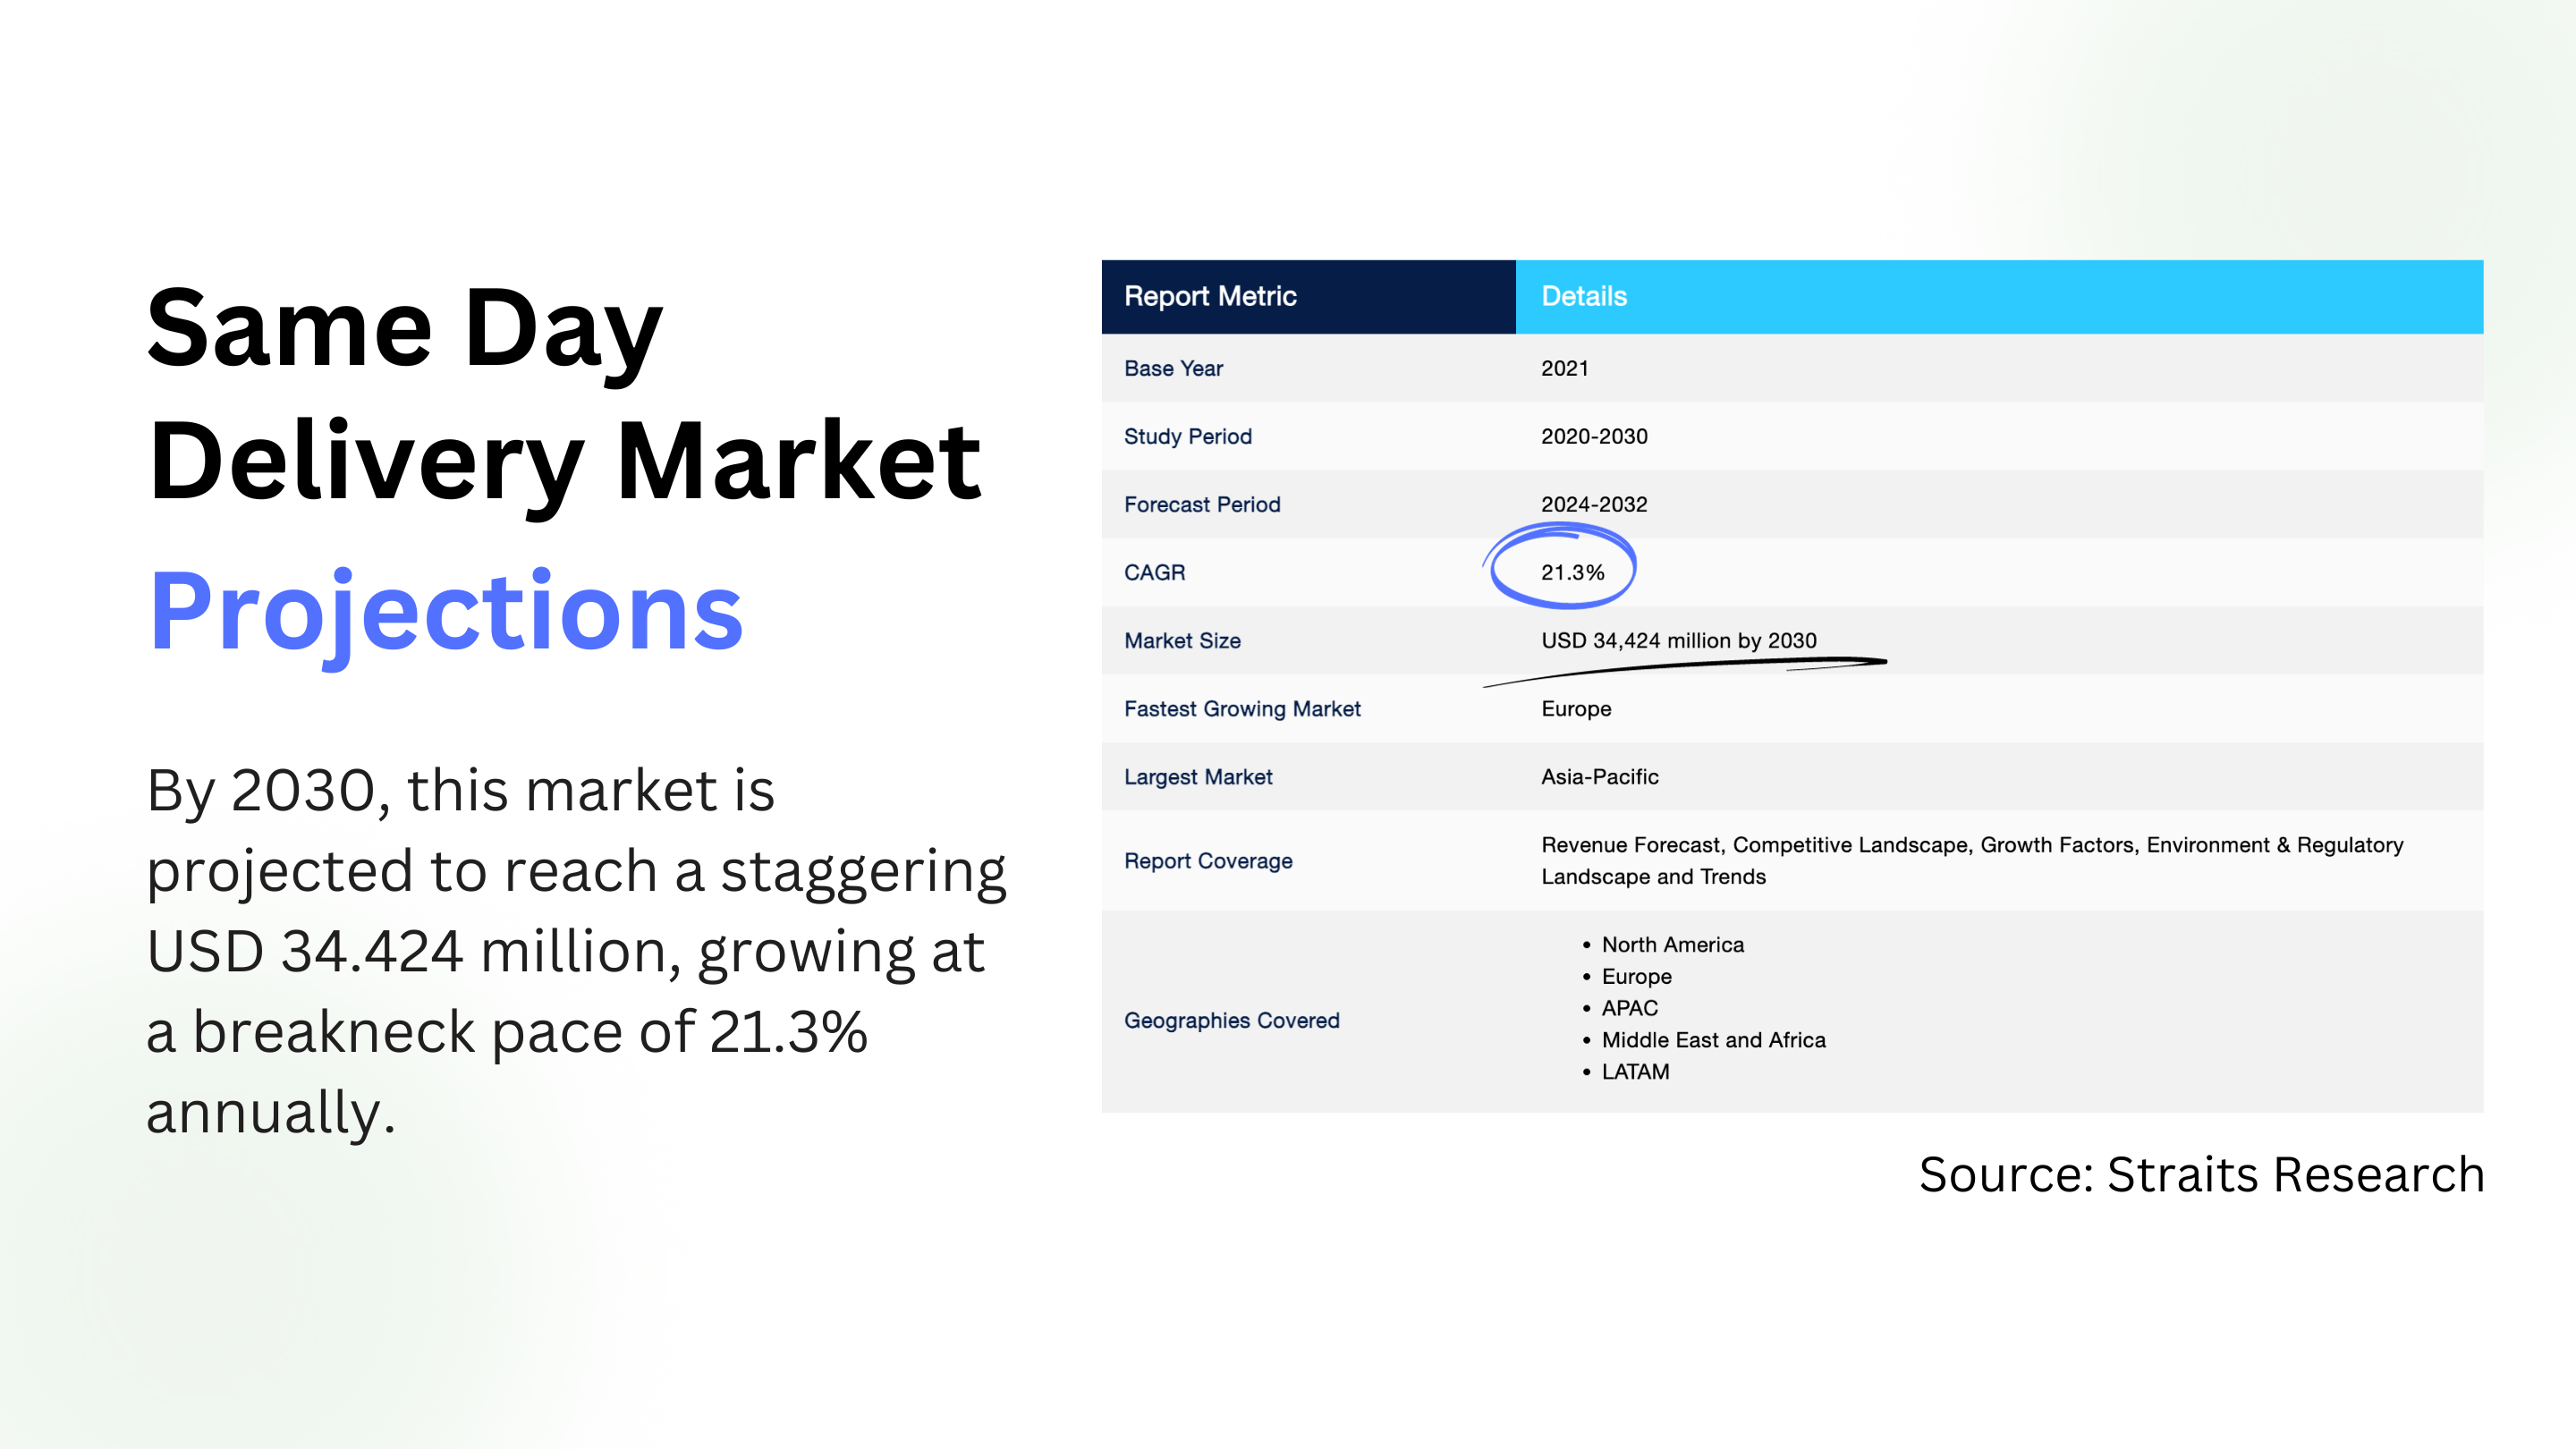 an image including statistics about Same Day Delivery market projections by year 2030